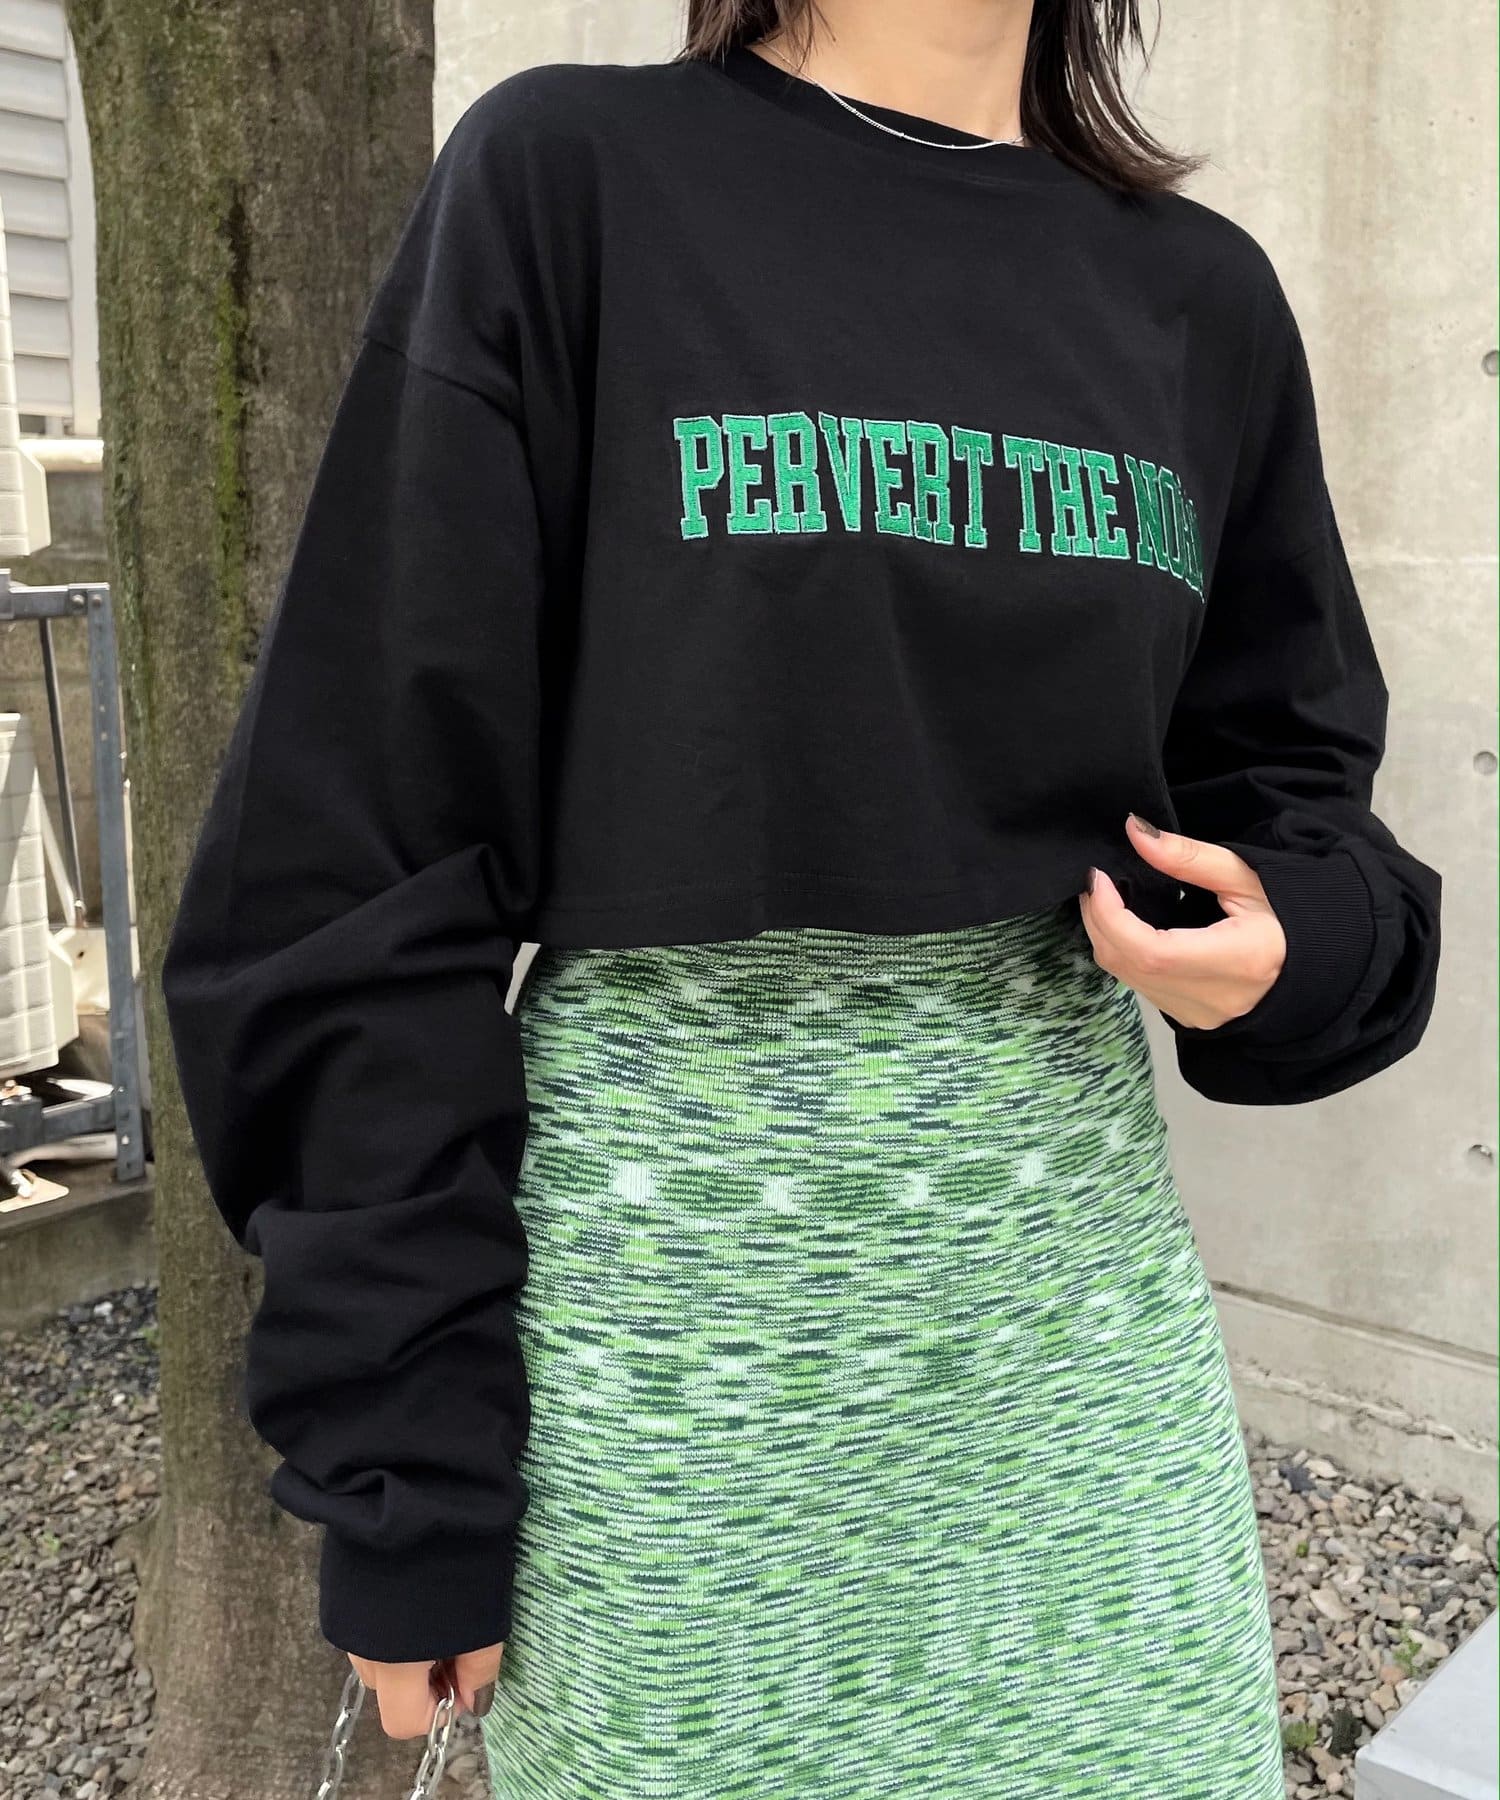 WHO’S WHO gallery(フーズフーギャラリー) PERVERTショートロンT